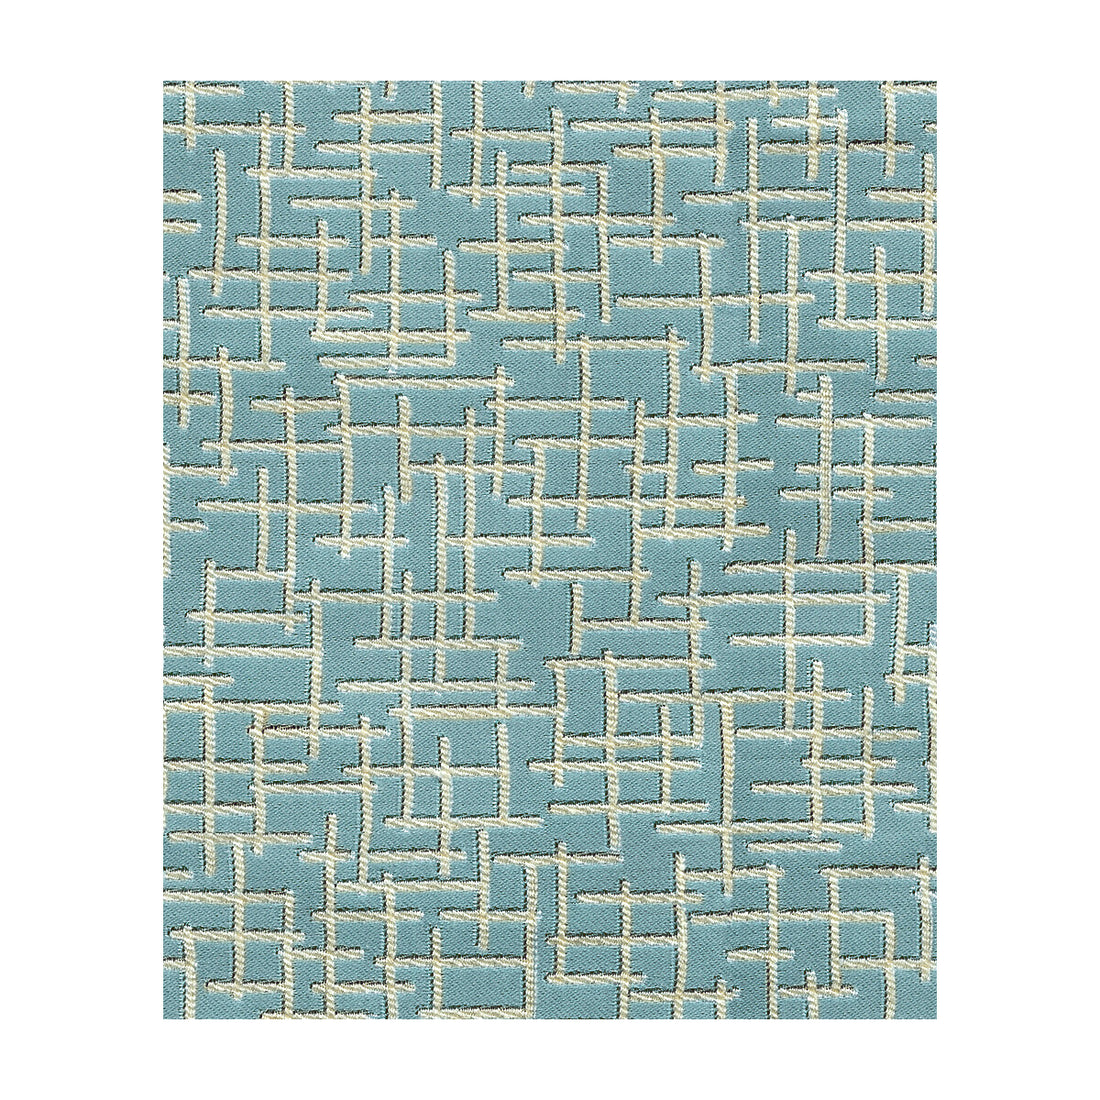 Balsa fabric in vapor color - pattern 34156.35.0 - by Kravet Design in the Candice Olson collection